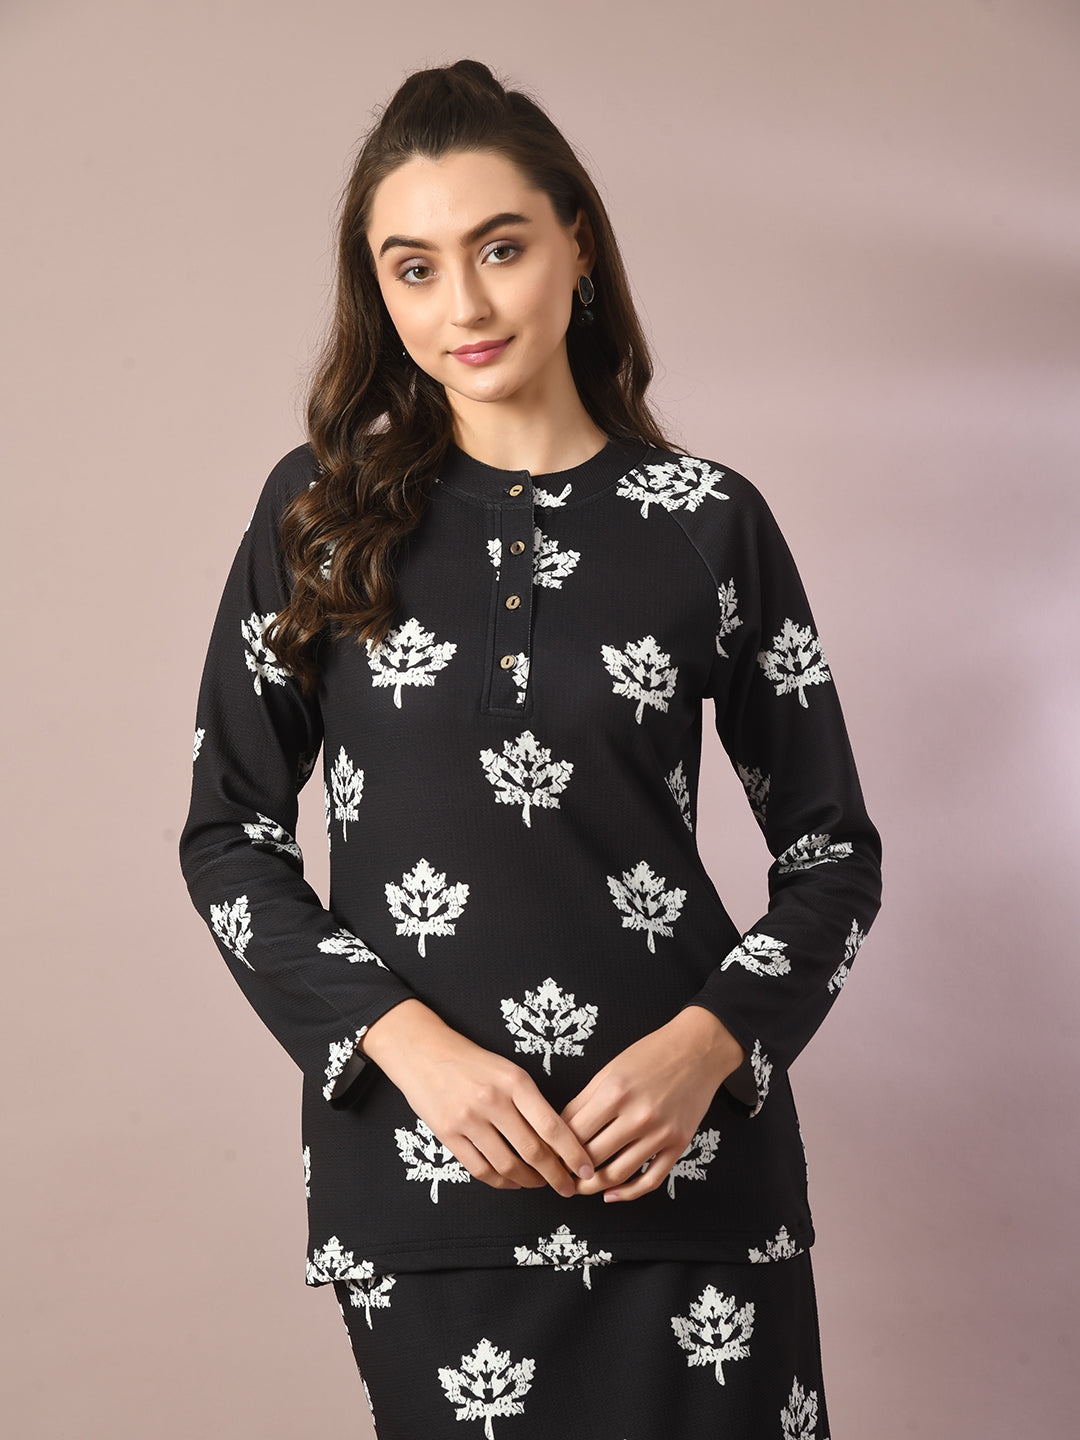 Women's  Black Printed Round Neck Party Top With Skirt Co-Ord Set  - Myshka